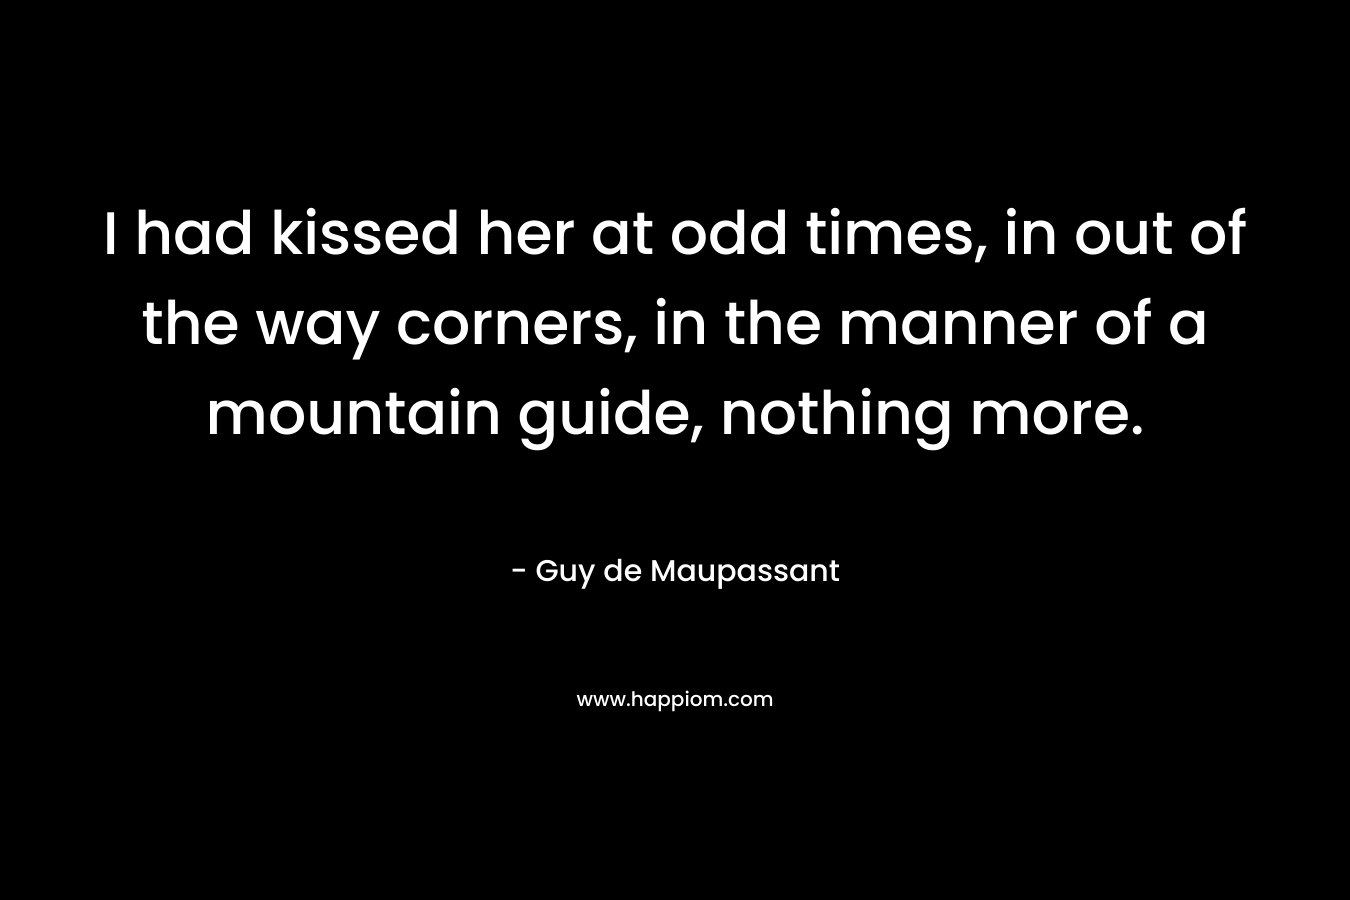 I had kissed her at odd times, in out of the way corners, in the manner of a mountain guide, nothing more.